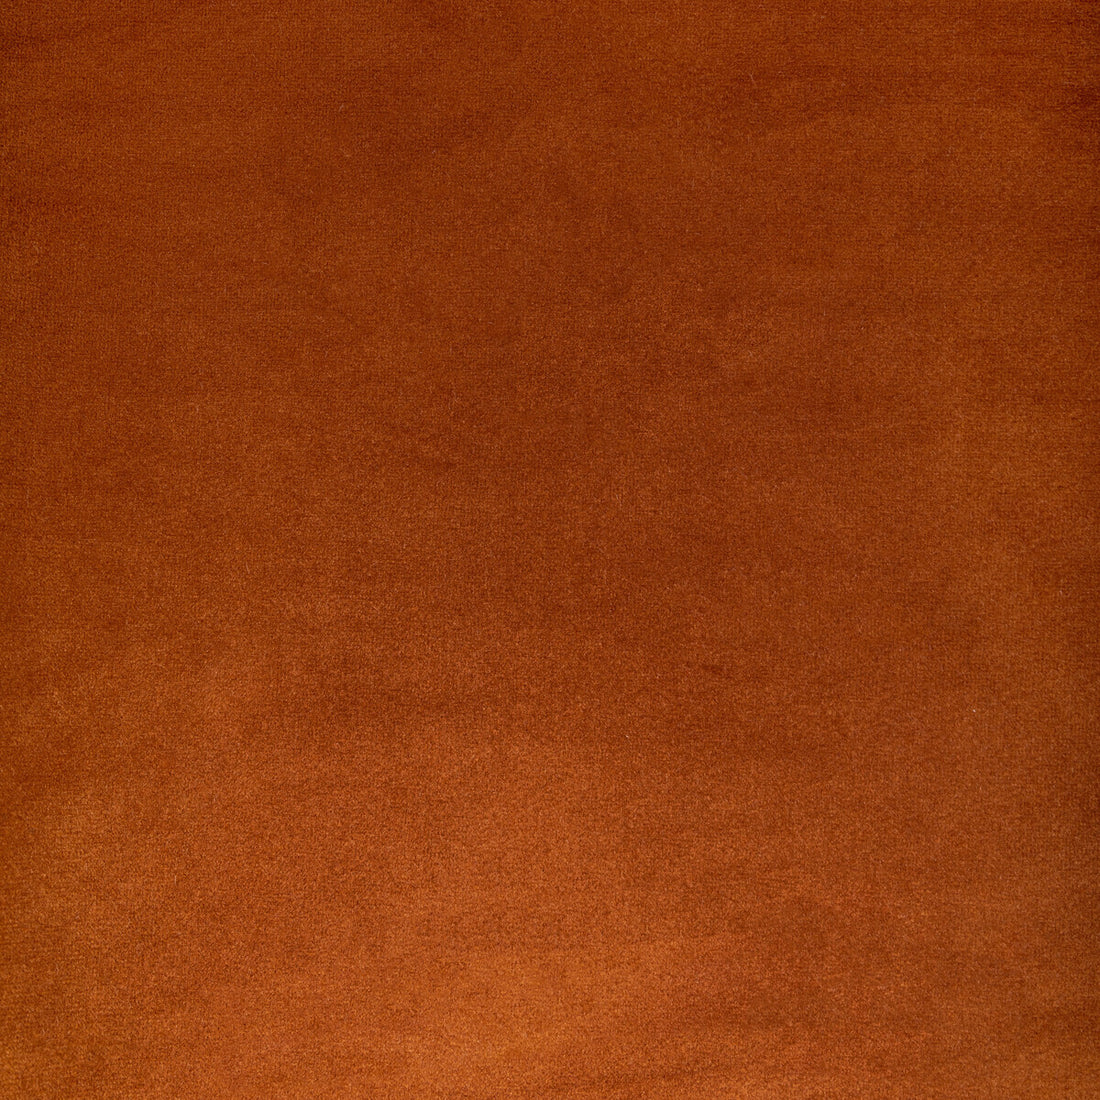 Rocco Velvet fabric in spice color - pattern 36652.24.0 - by Kravet Contract